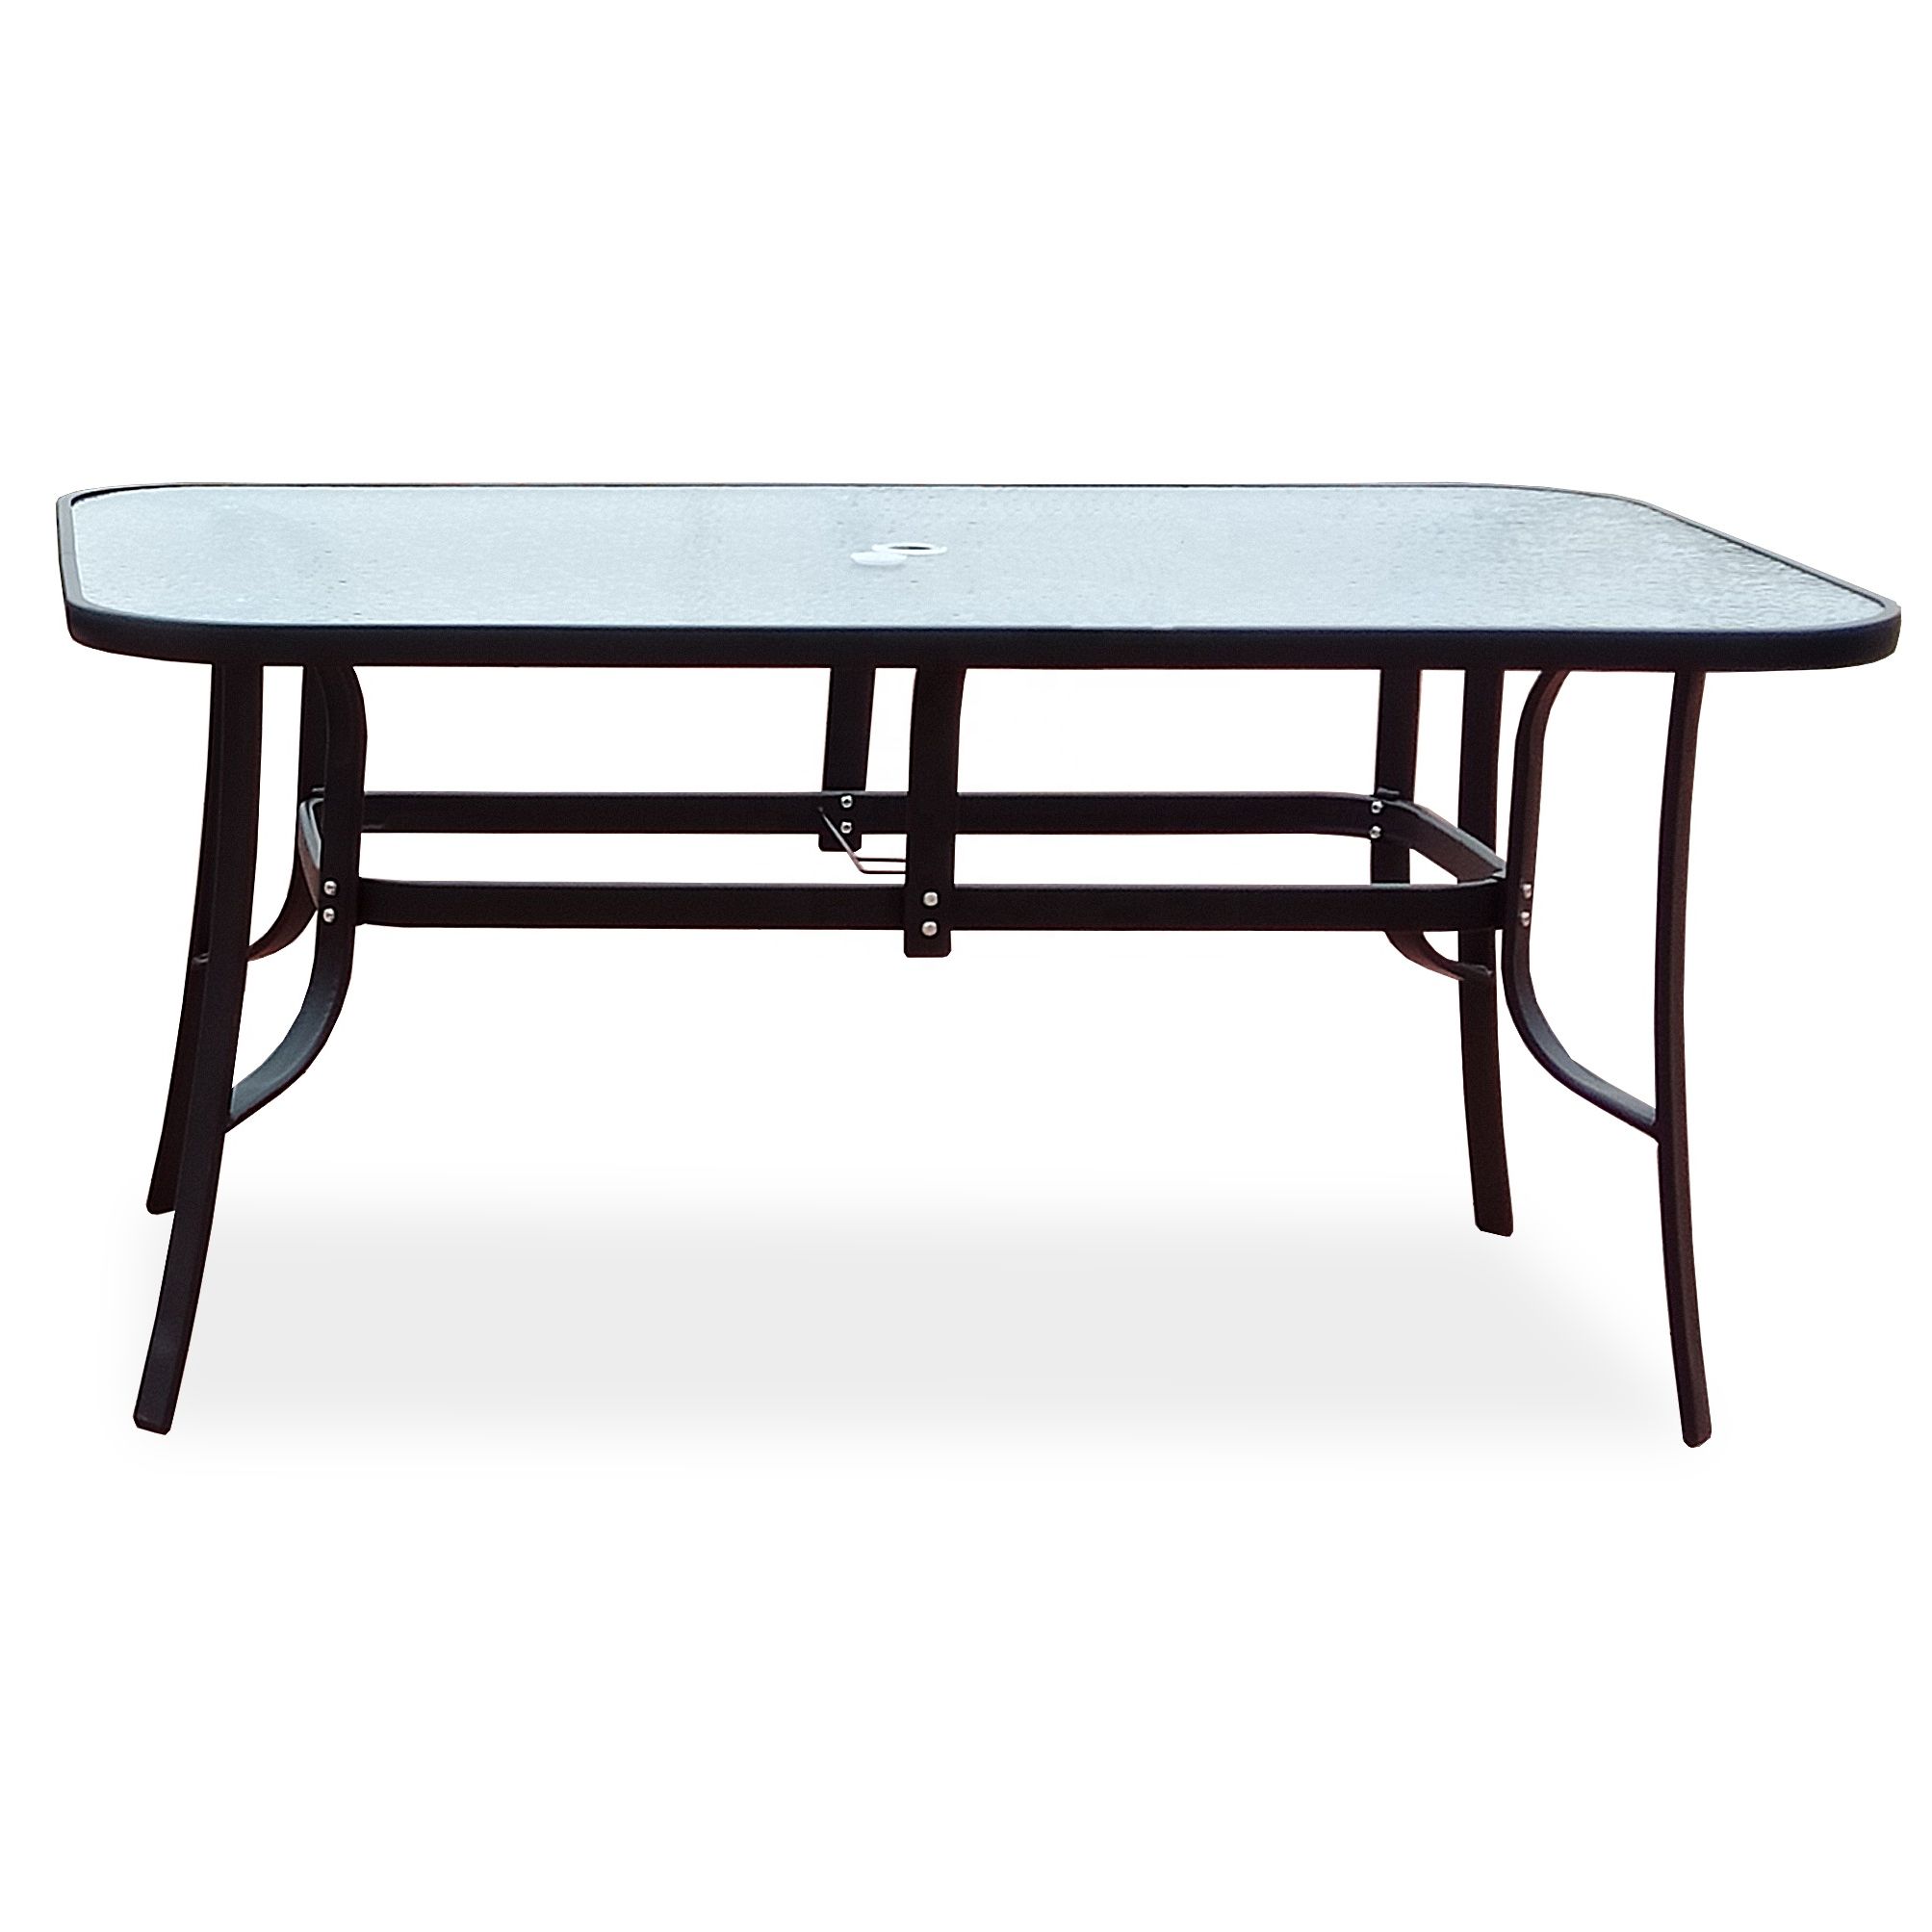 Tempered Glass Top Outdoor Tables With Recent Rectangular Modern Outdoor Iron Metal Tempered Glass Patio Dining Garden  Table With Umbrella Hole Glass Top – Buy Garden Table Product On Alibaba (View 3 of 15)